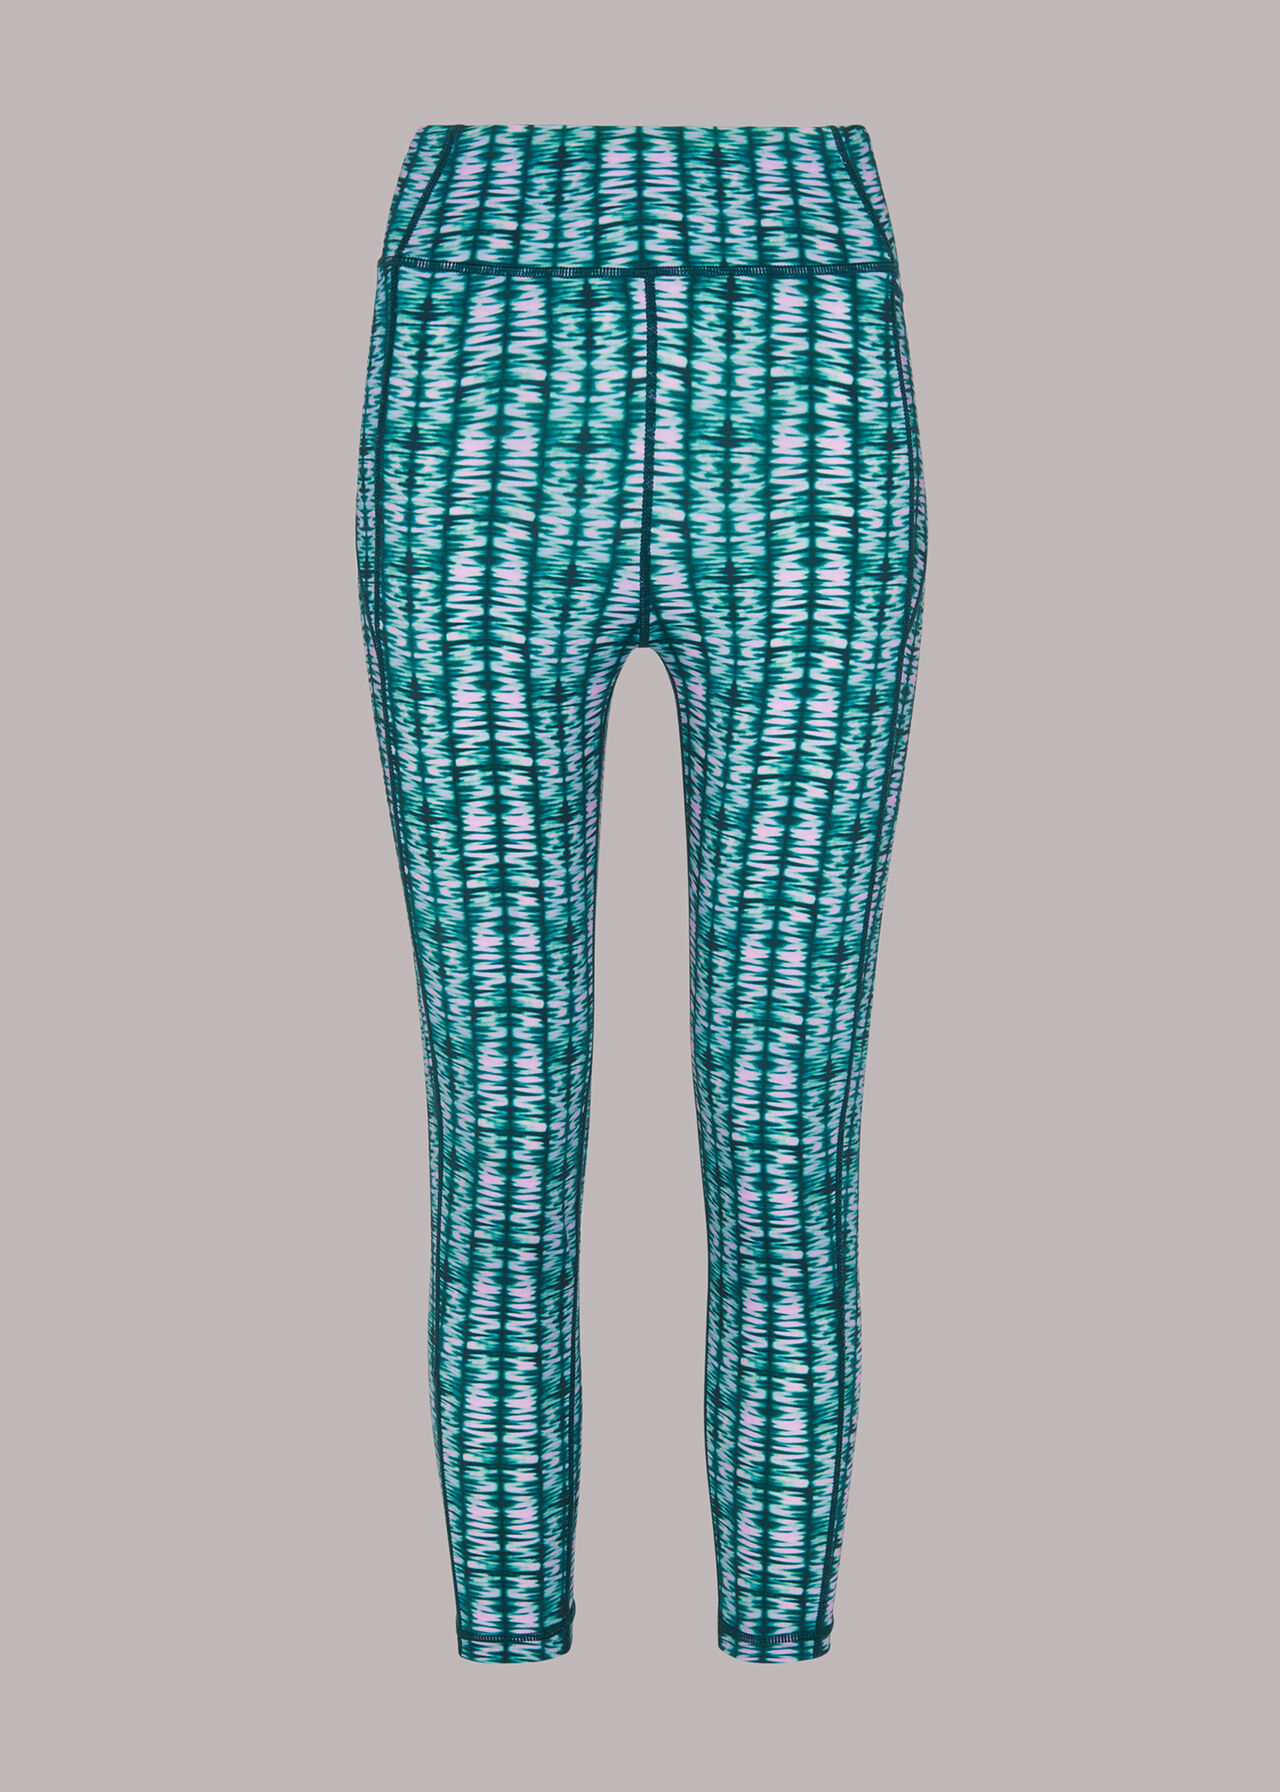 Abstract Wave Layered Legging